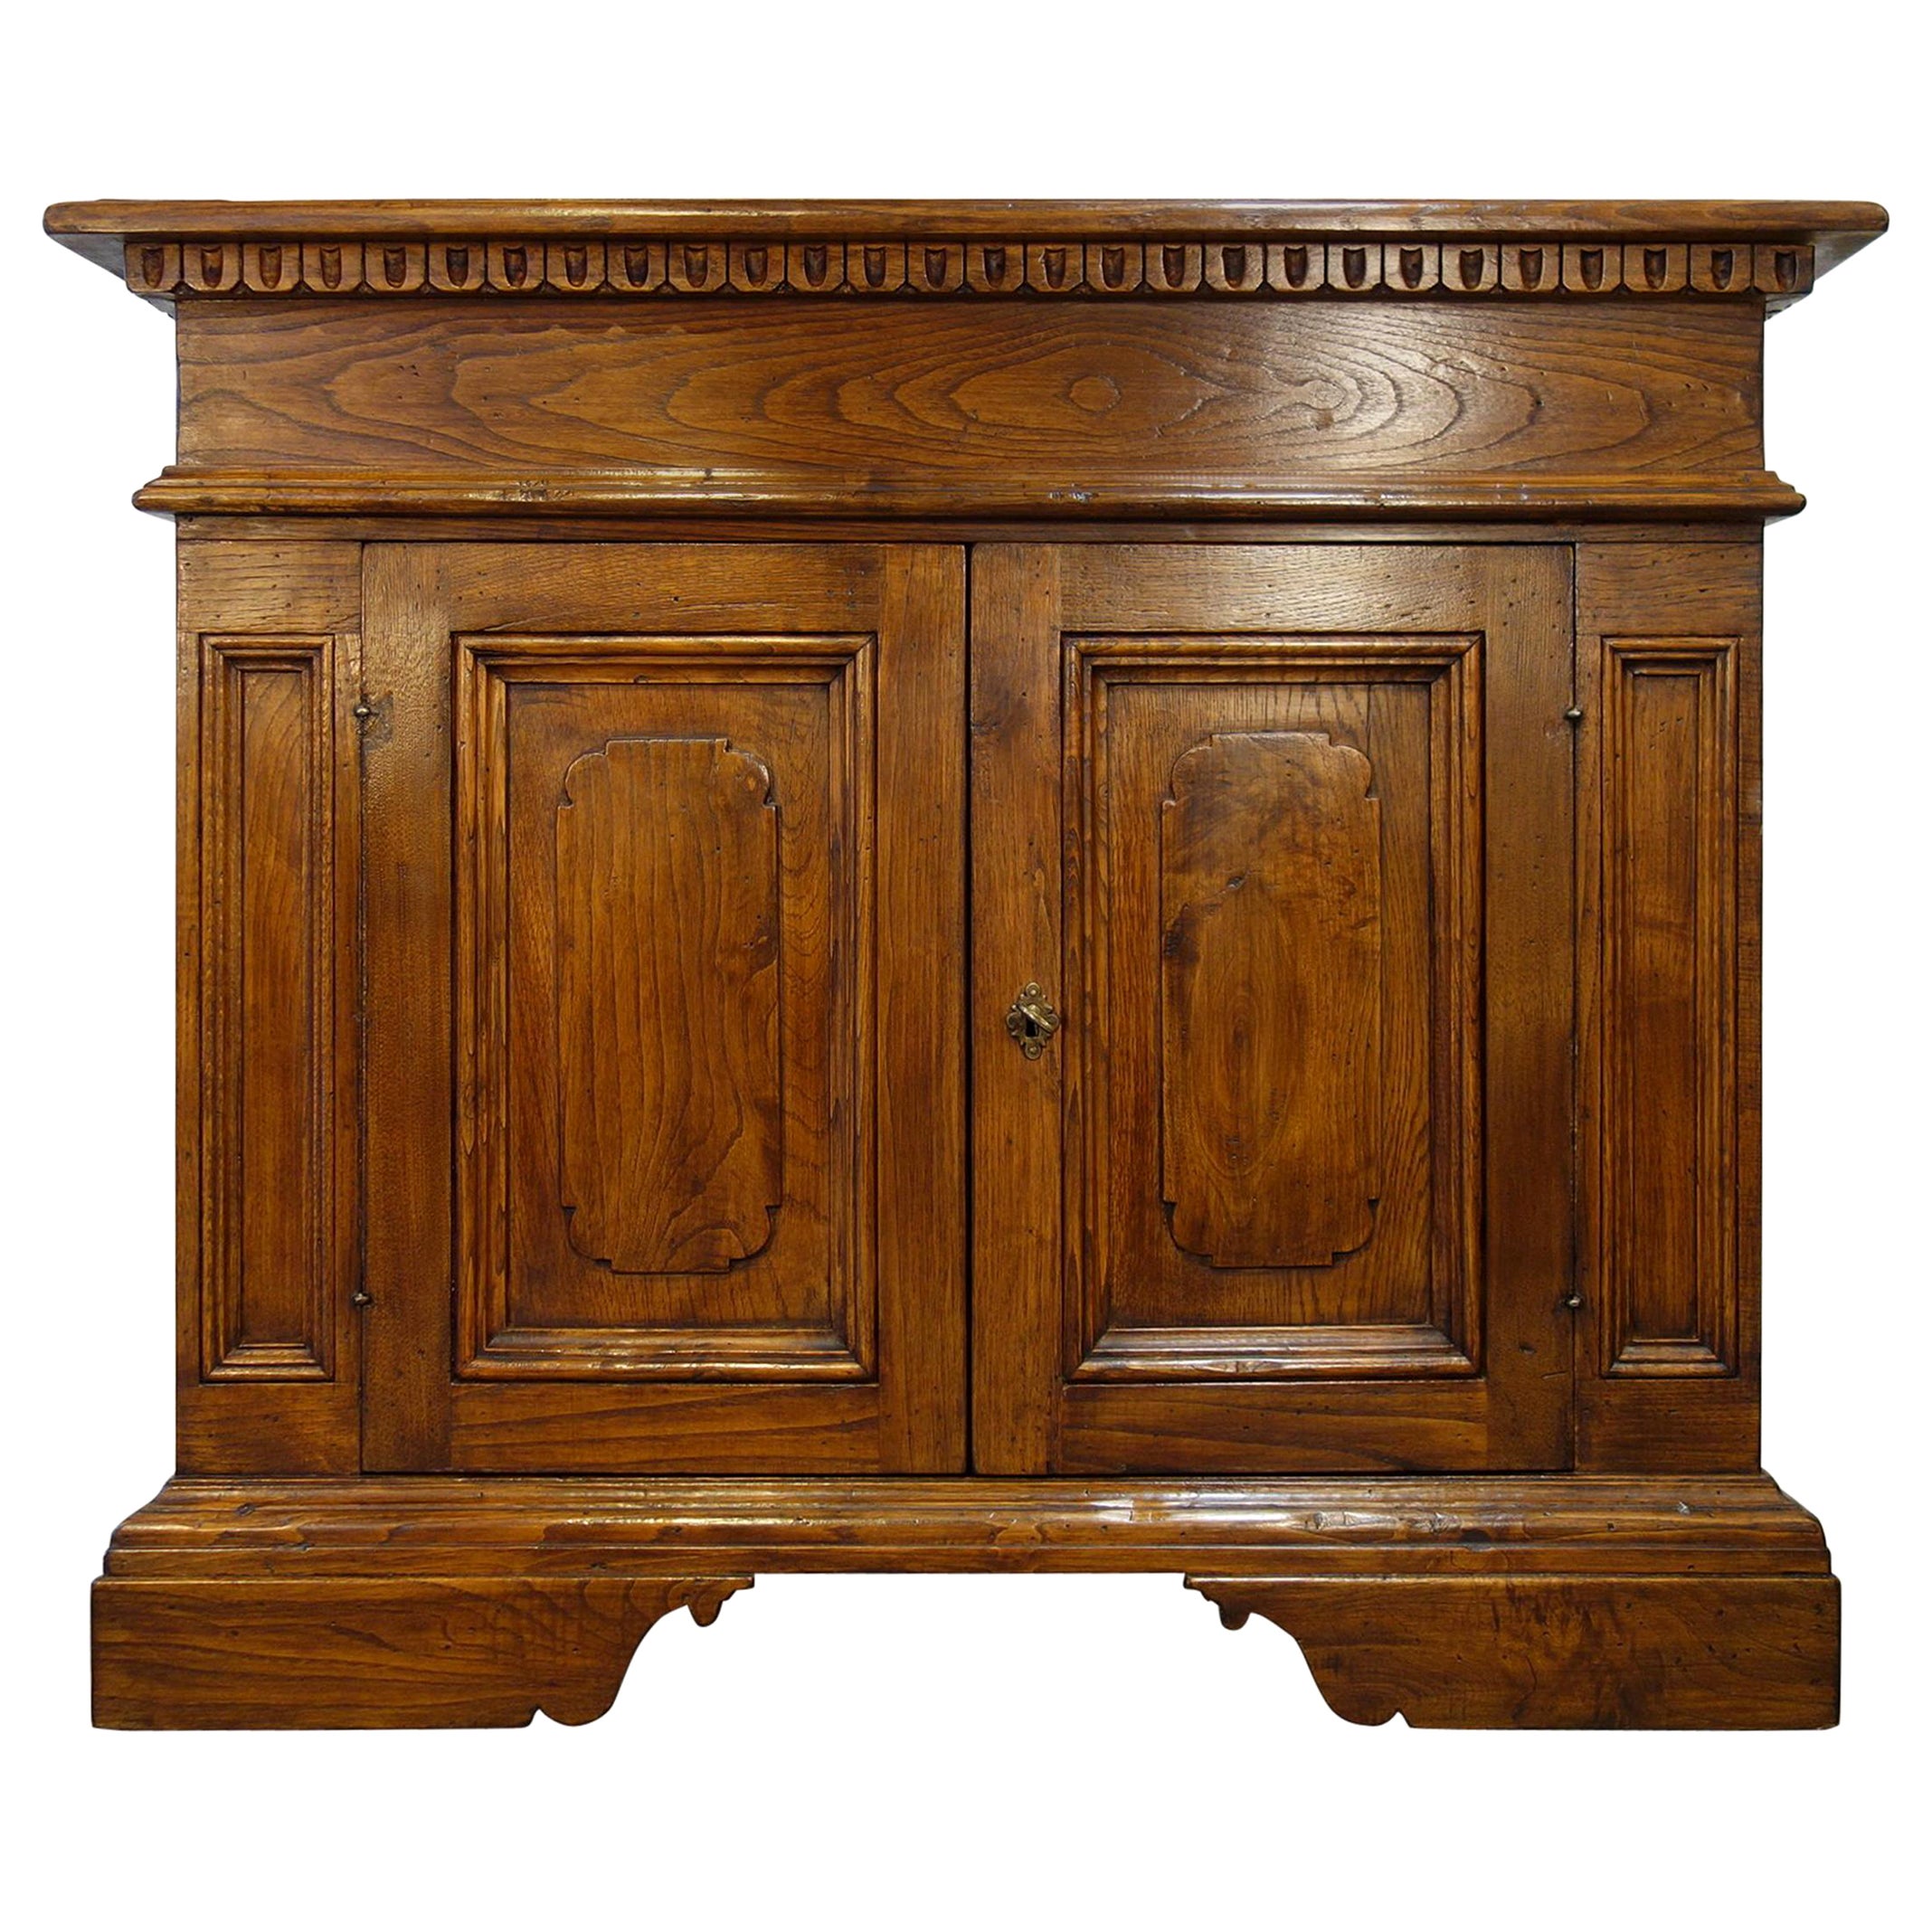 18th C Style Maggiore Old Chestnut Credenza Vanity reproduction to order options